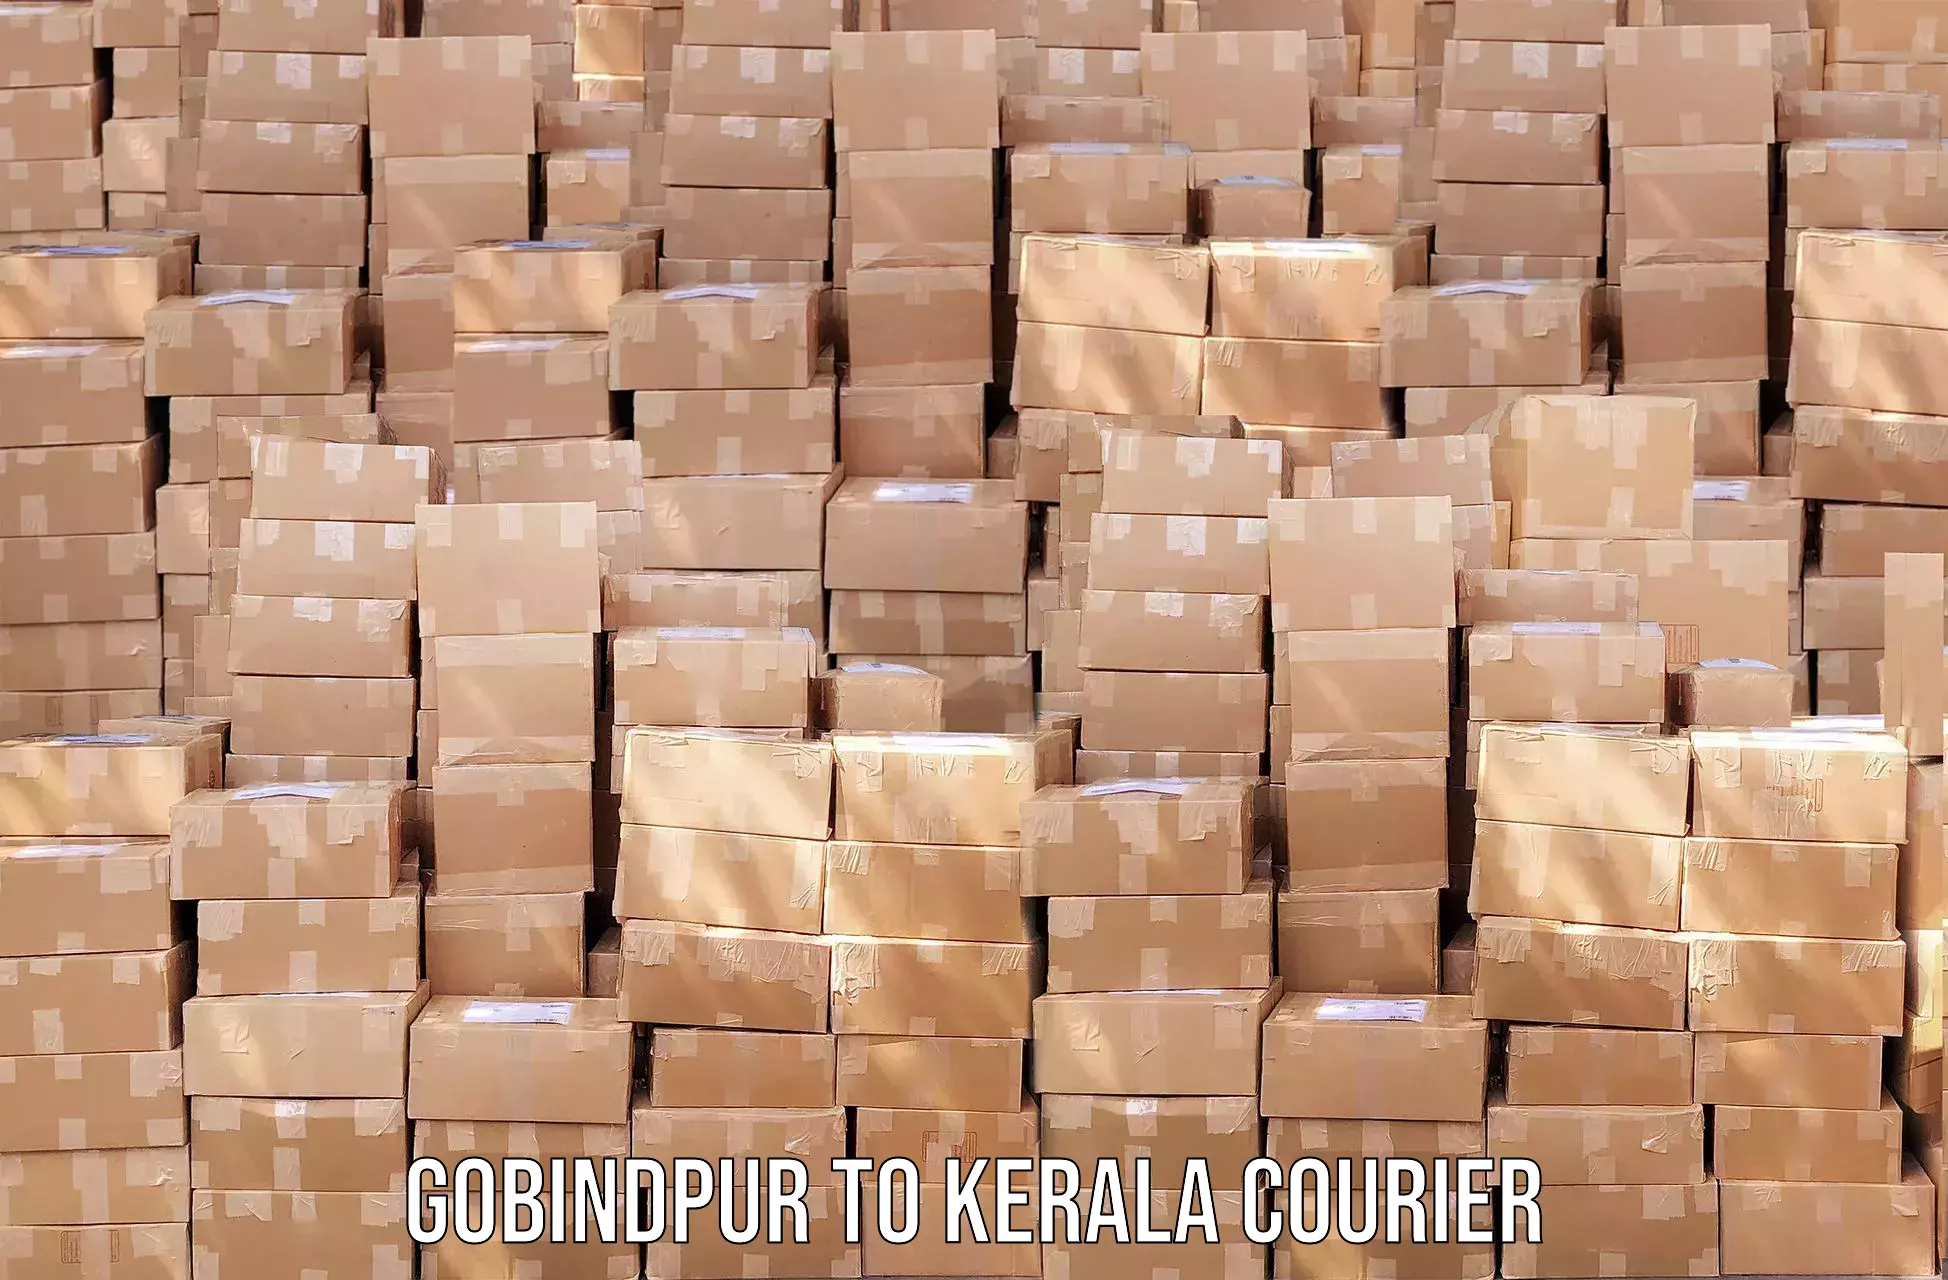 Online shipping calculator Gobindpur to Cochin University of Science and Technology